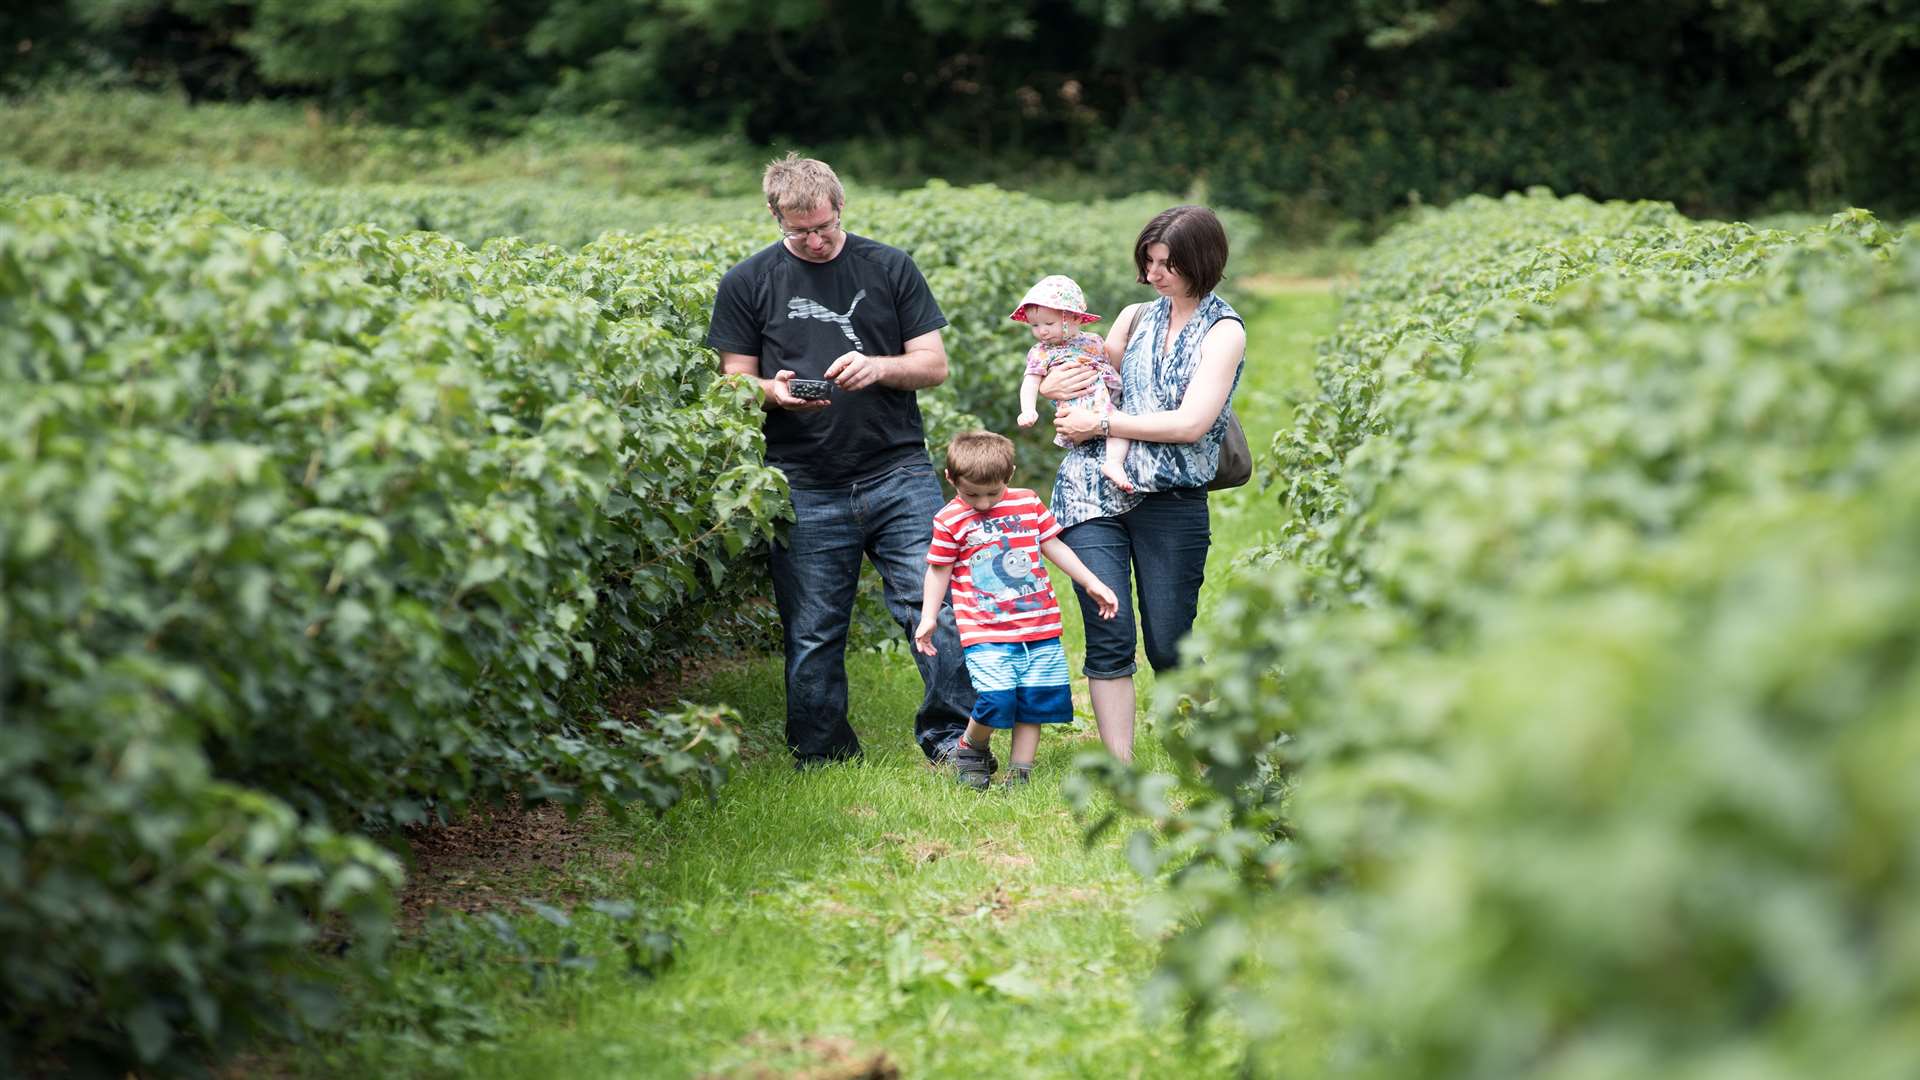 Families can see Ribena blackcurrants being harvested